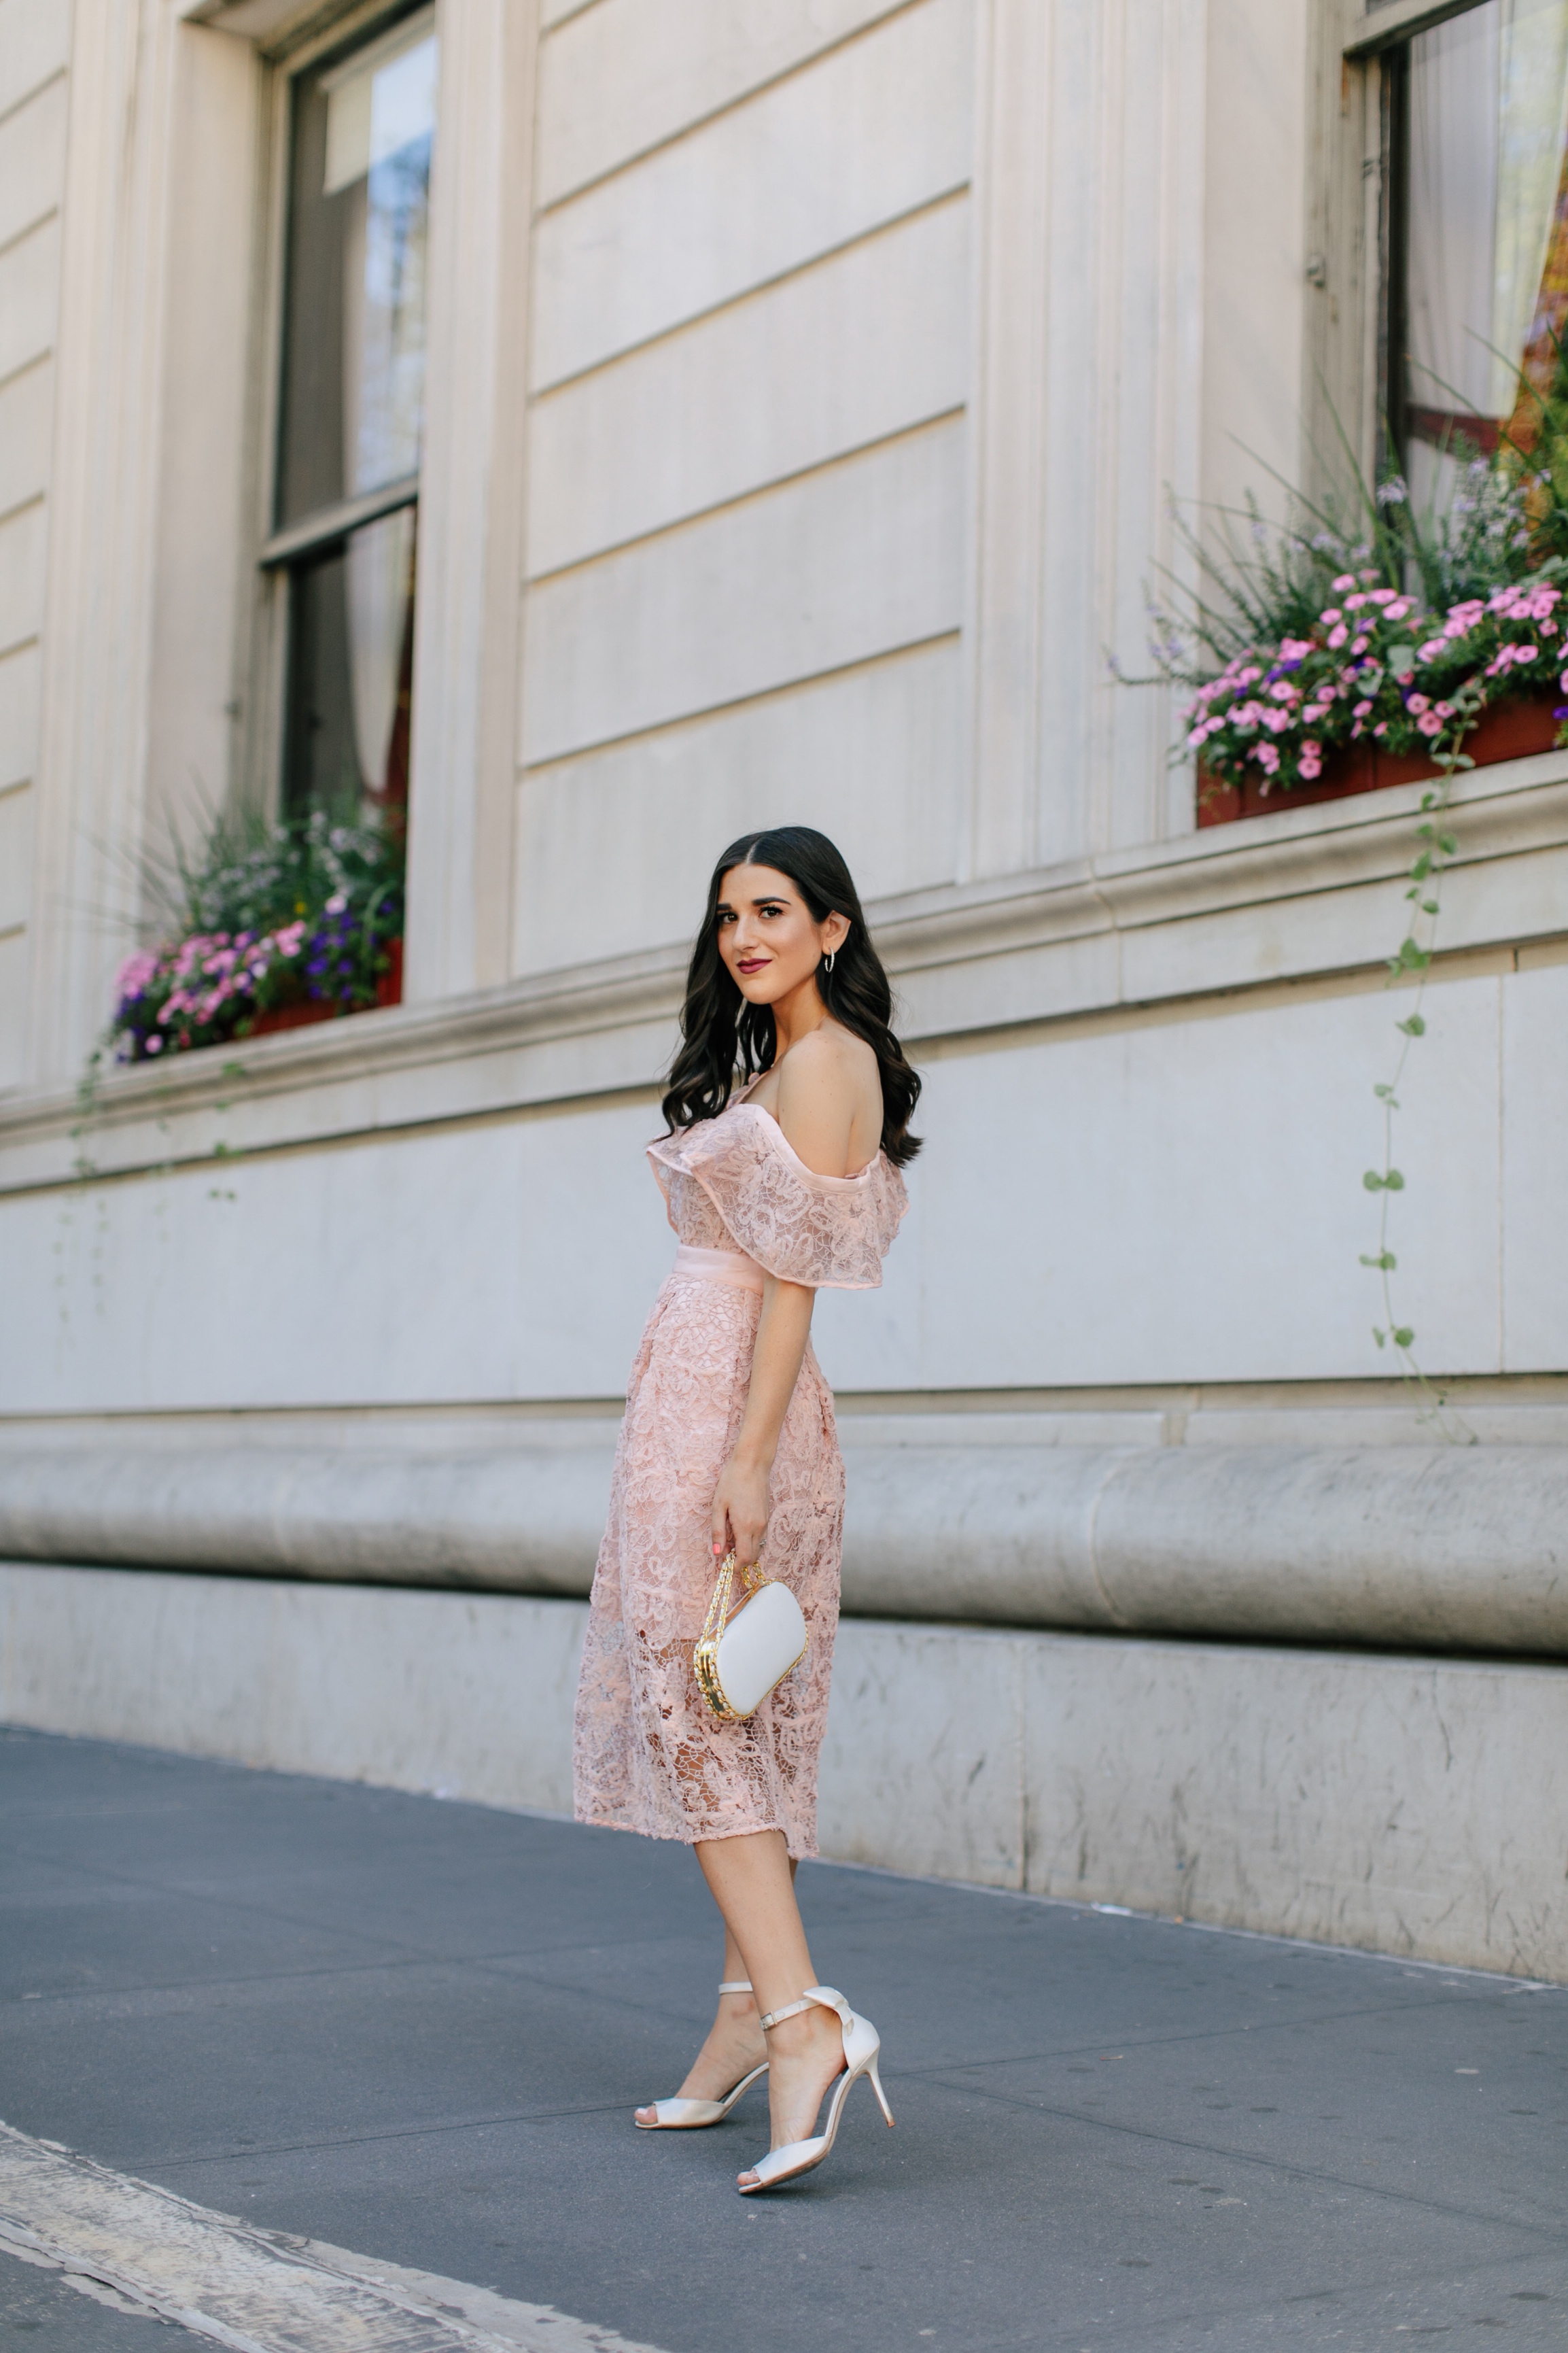 A New Perspective On Instagram Jealousy Pink Lace Dress Ivory Bow Heels Esther Santer Fashion Blog NYC Street Style Blogger Outfit OOTD Trendy White Bag Clutch Self Portrait Designer Kate Spade Wedding Shoes Fancy Elegant Wear Feminine Formal Shopping.jpg